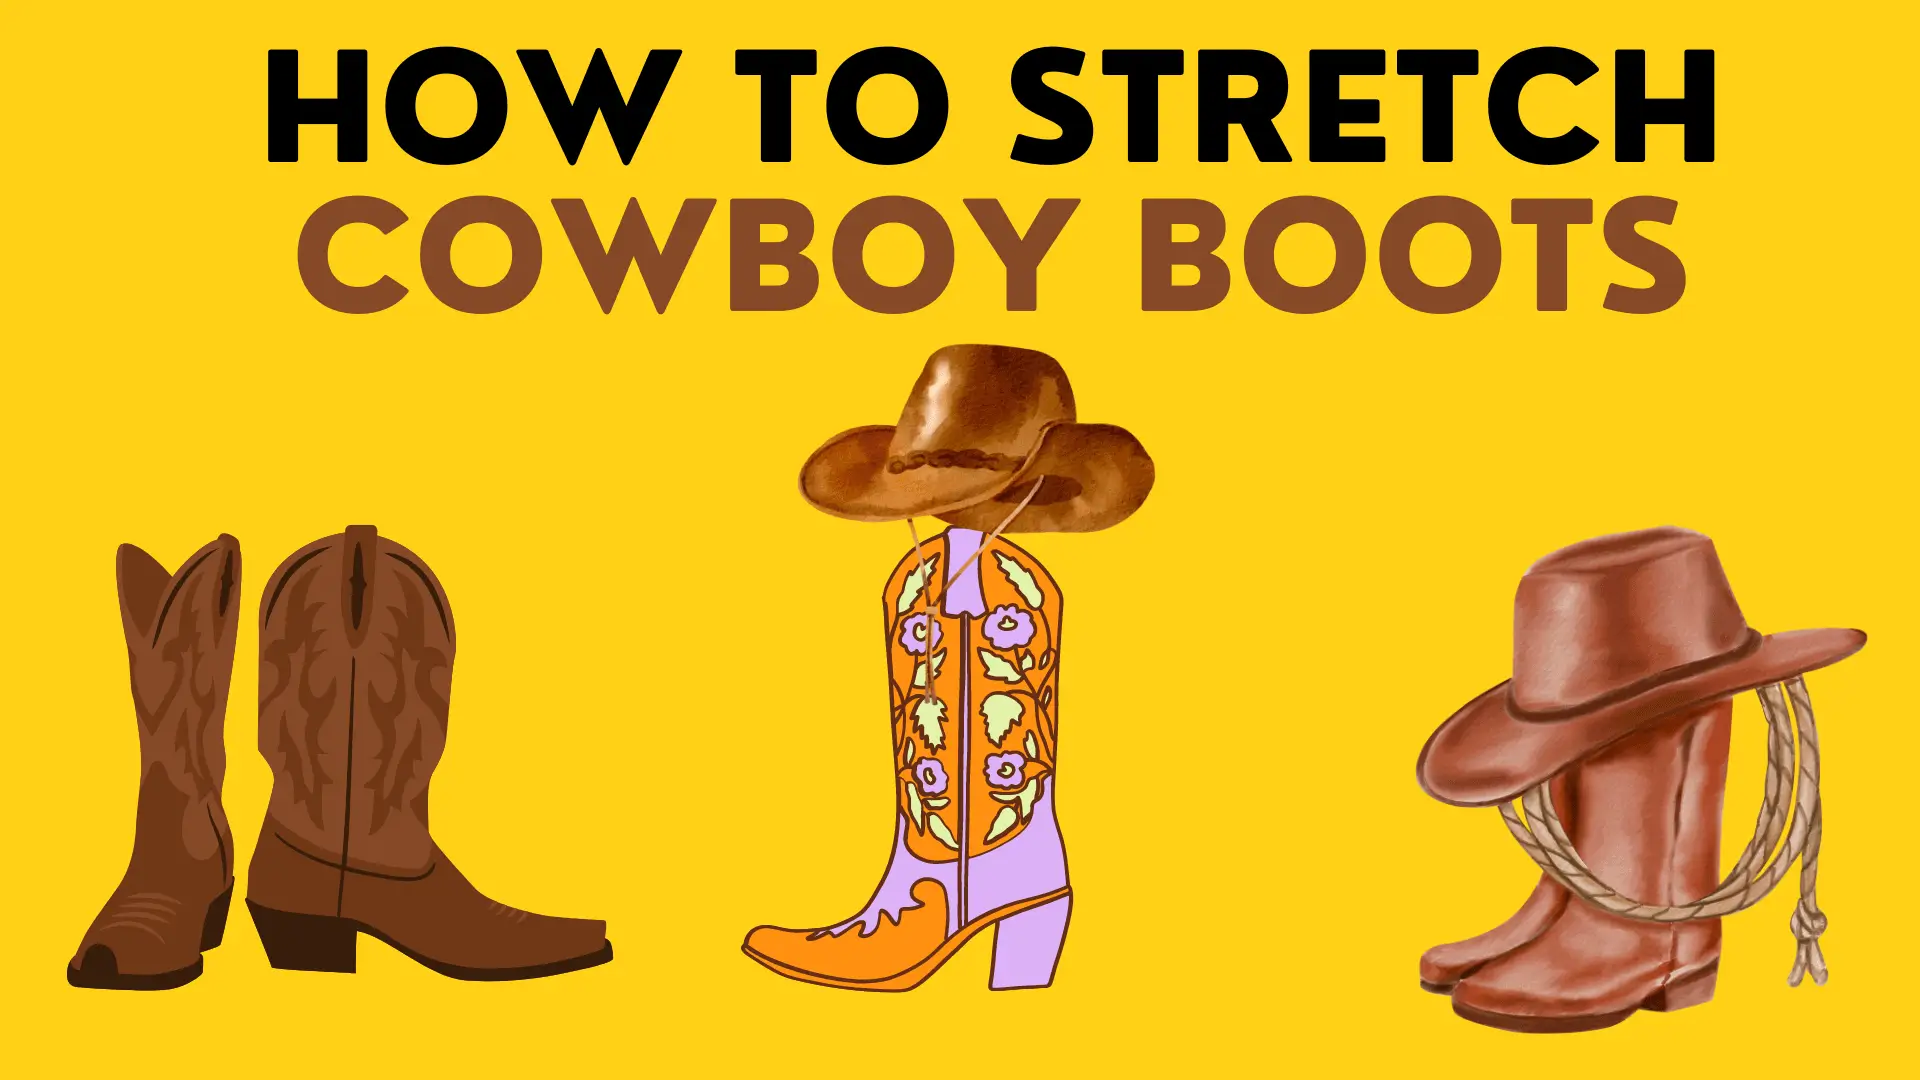 How to stretch cowboy boots